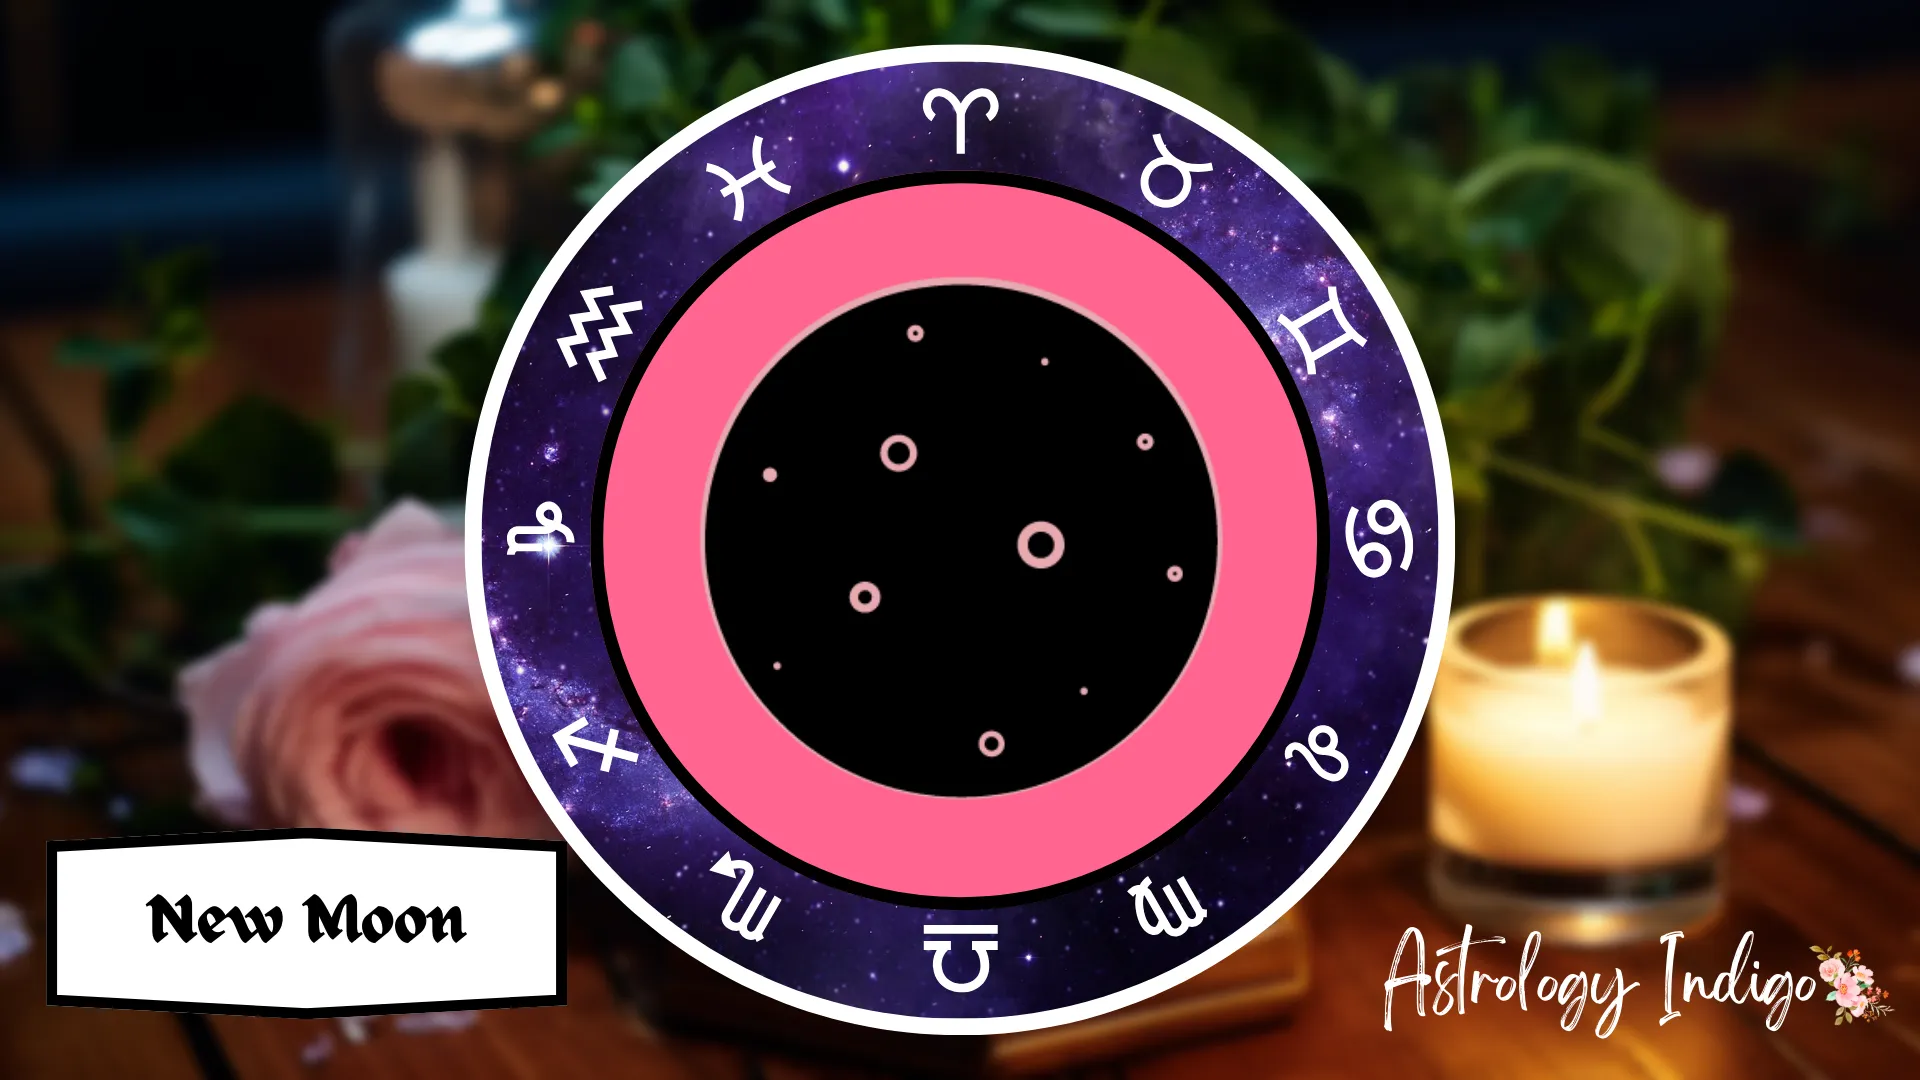 A symbol of a New Moon is surrounded by the Zodiac signs on a table with flowers and candles